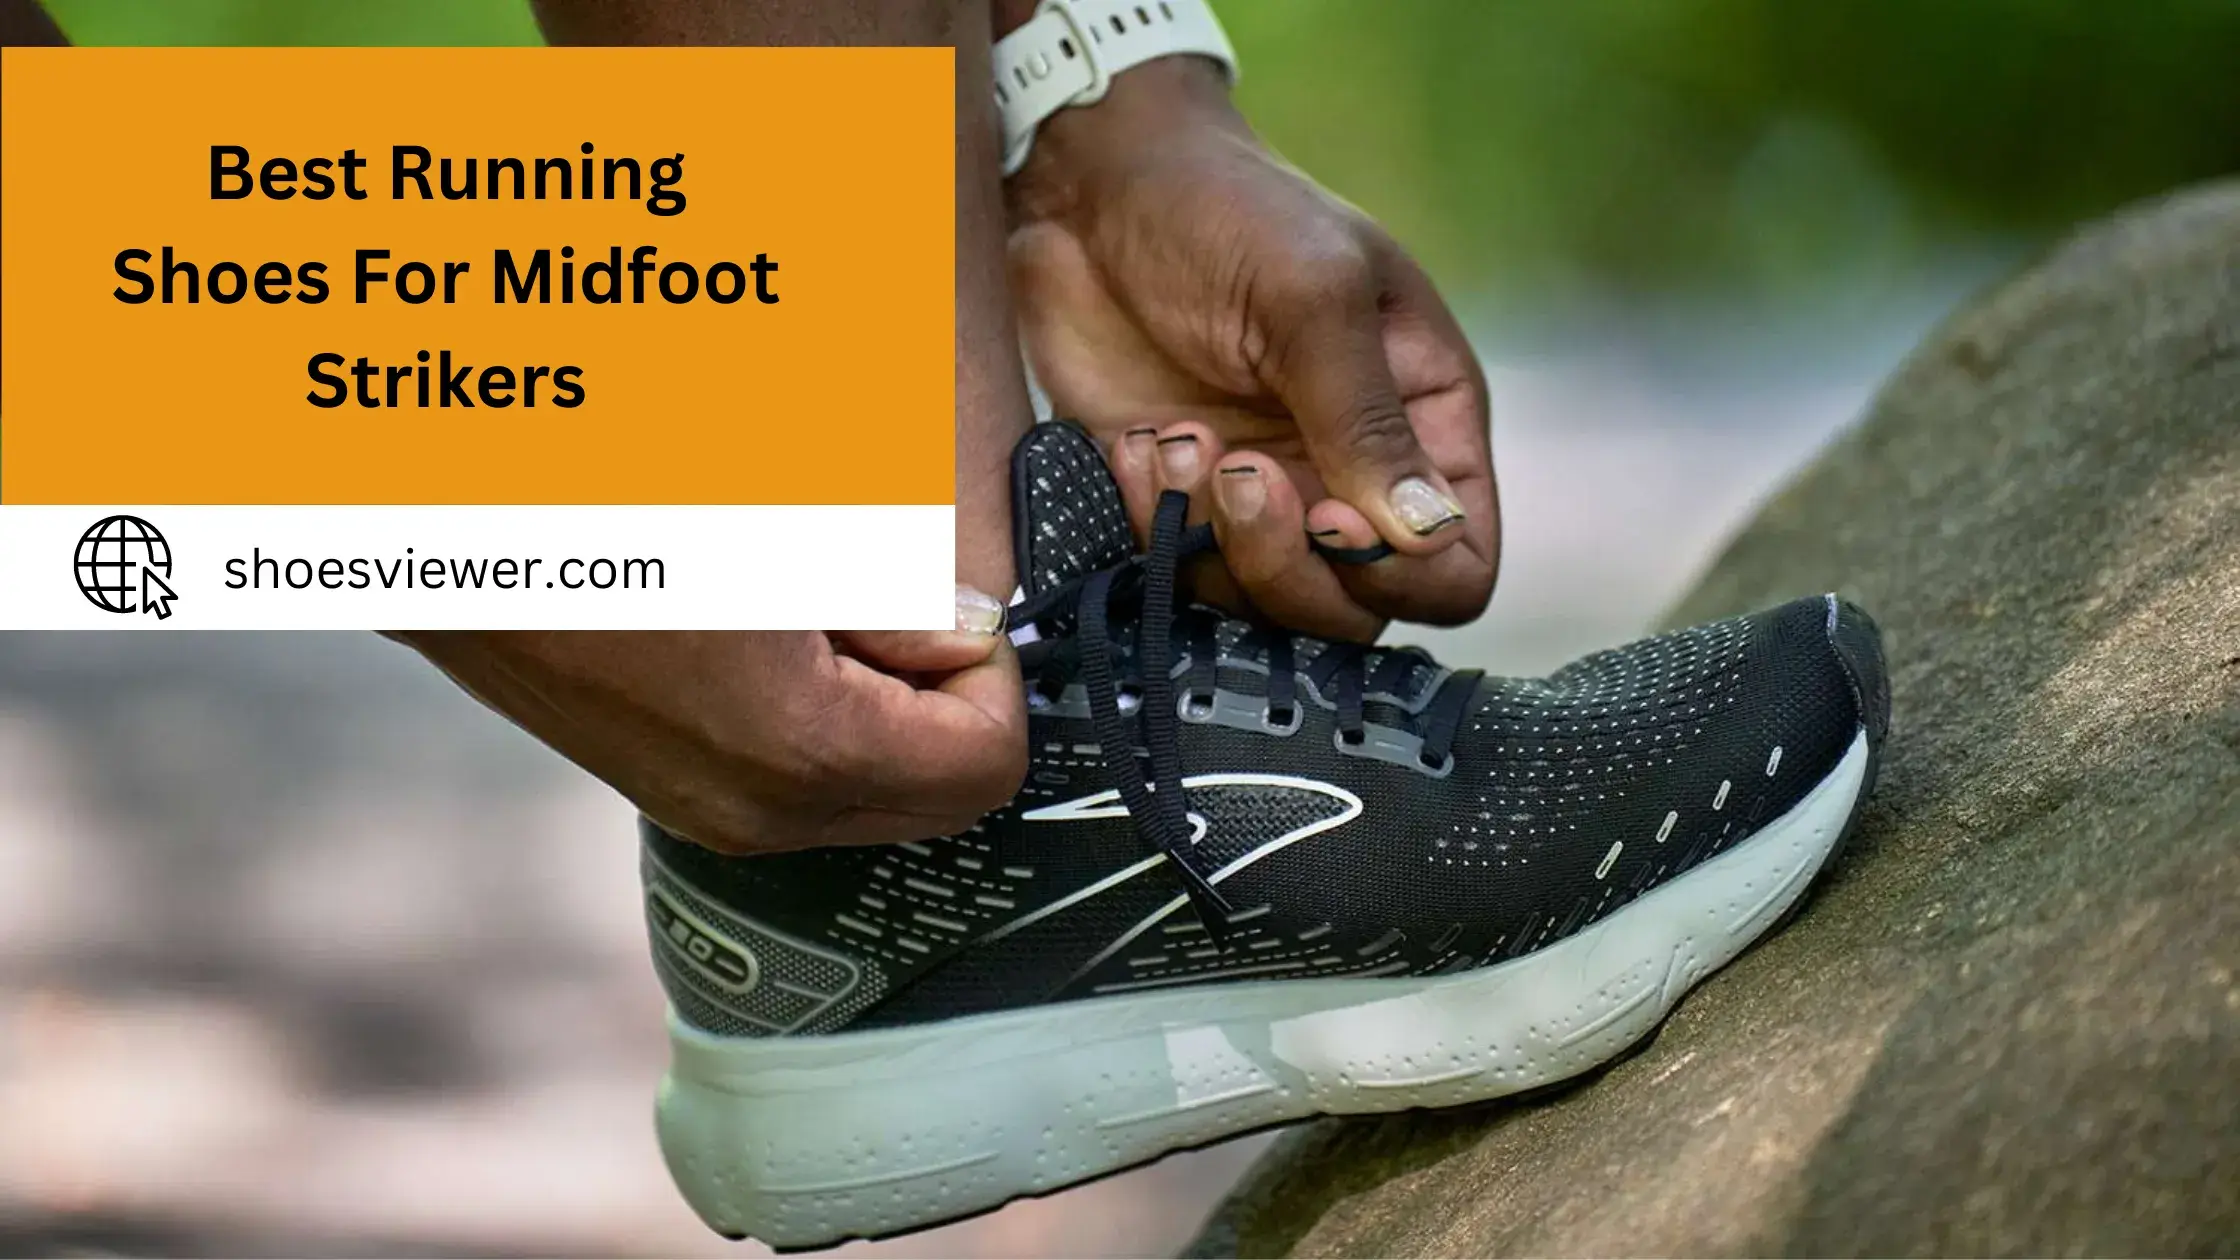 Best Running Shoes For Midfoot Strikers - (Complete Reviews)